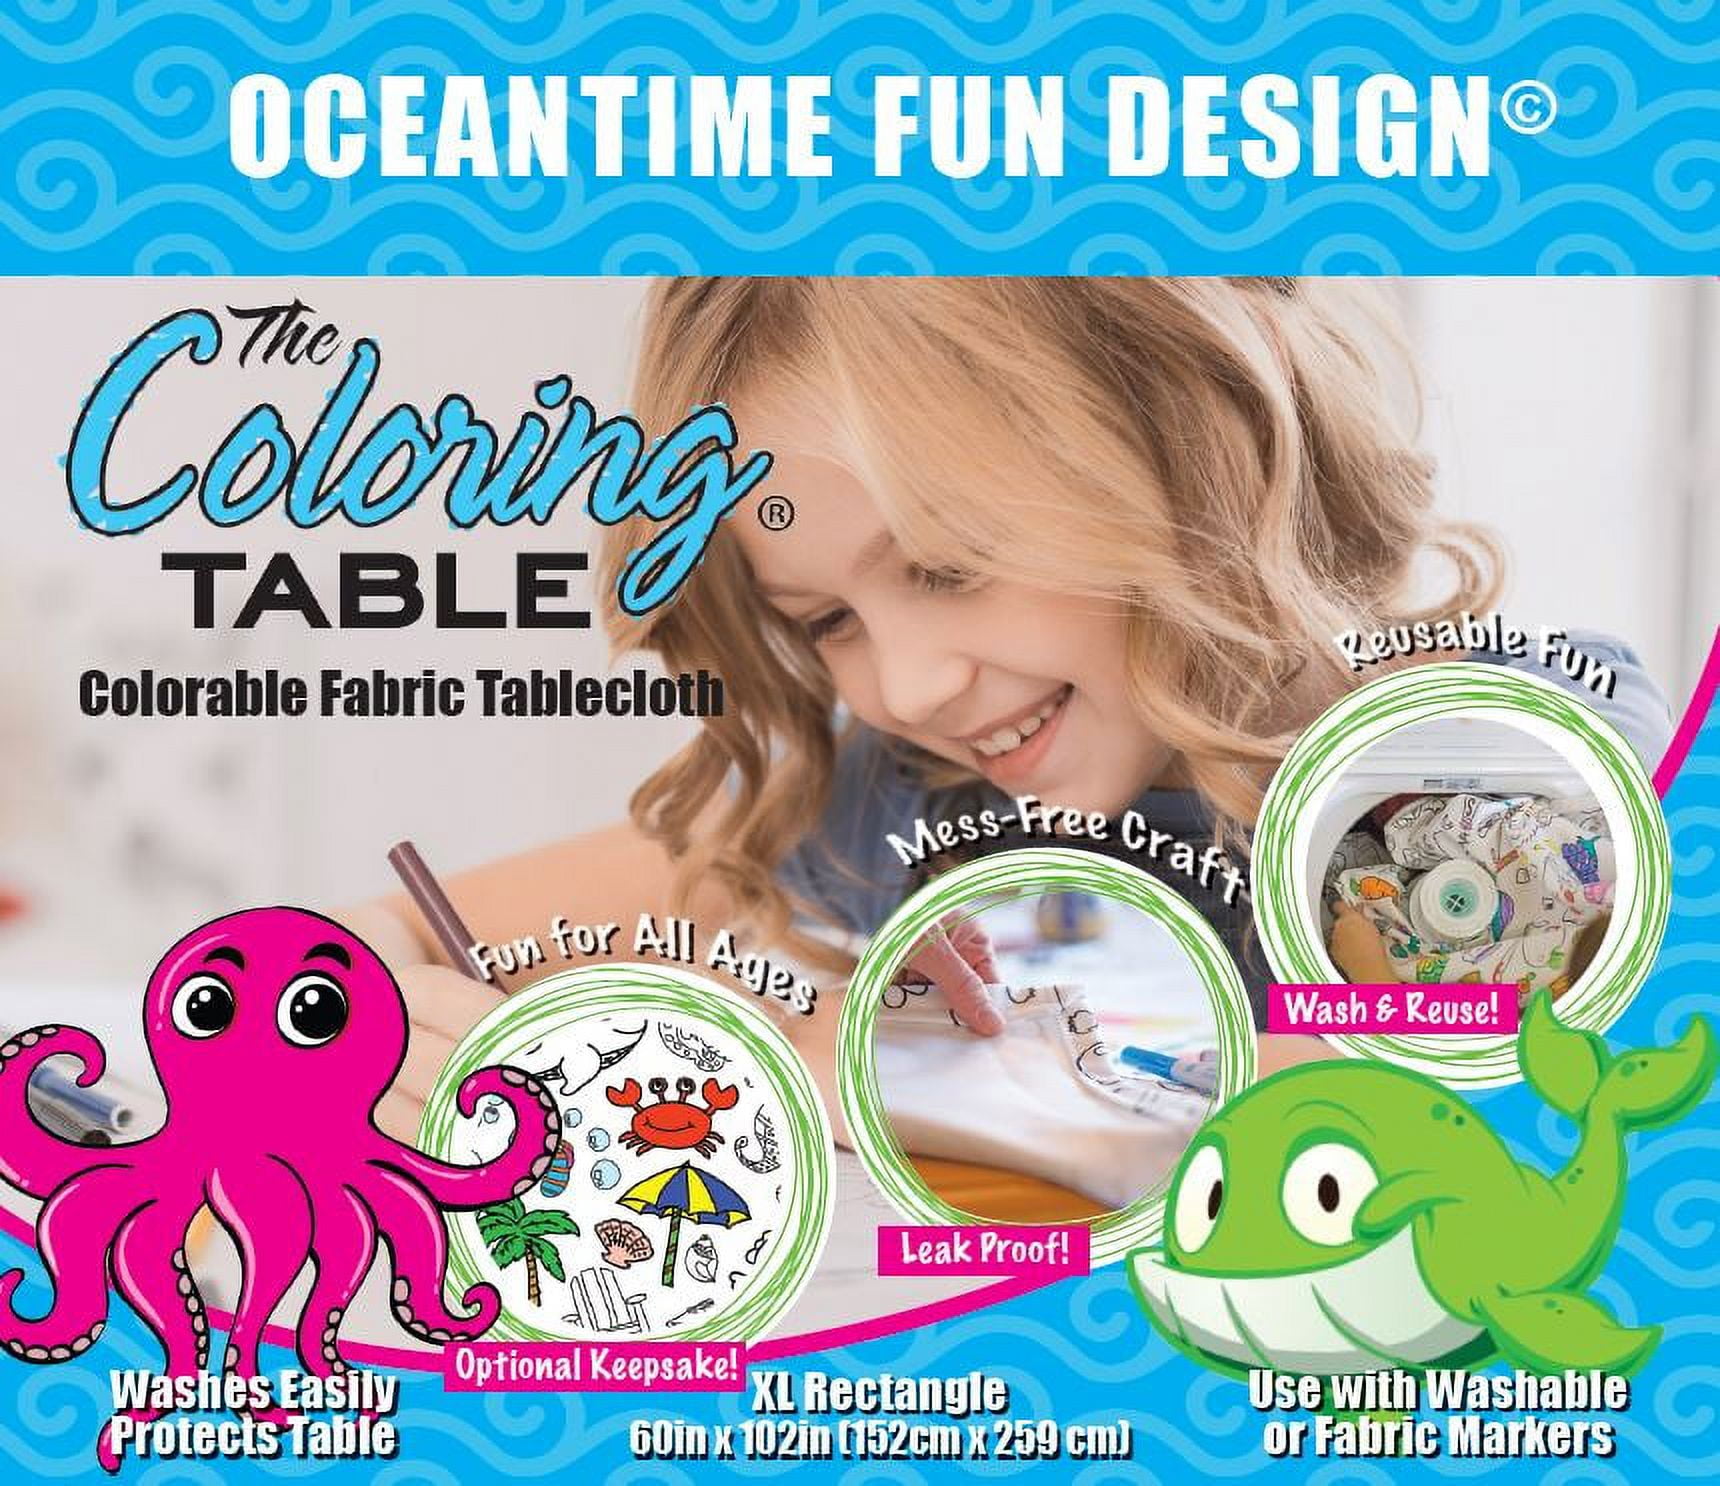  The Coloring Table – Food Fun Design – Square Tablecloth -  Fabric Coloring Tablecloth - Colorable Designs – Washable and Reusable –  Coloring Activity for Children and Adults : Toys & Games